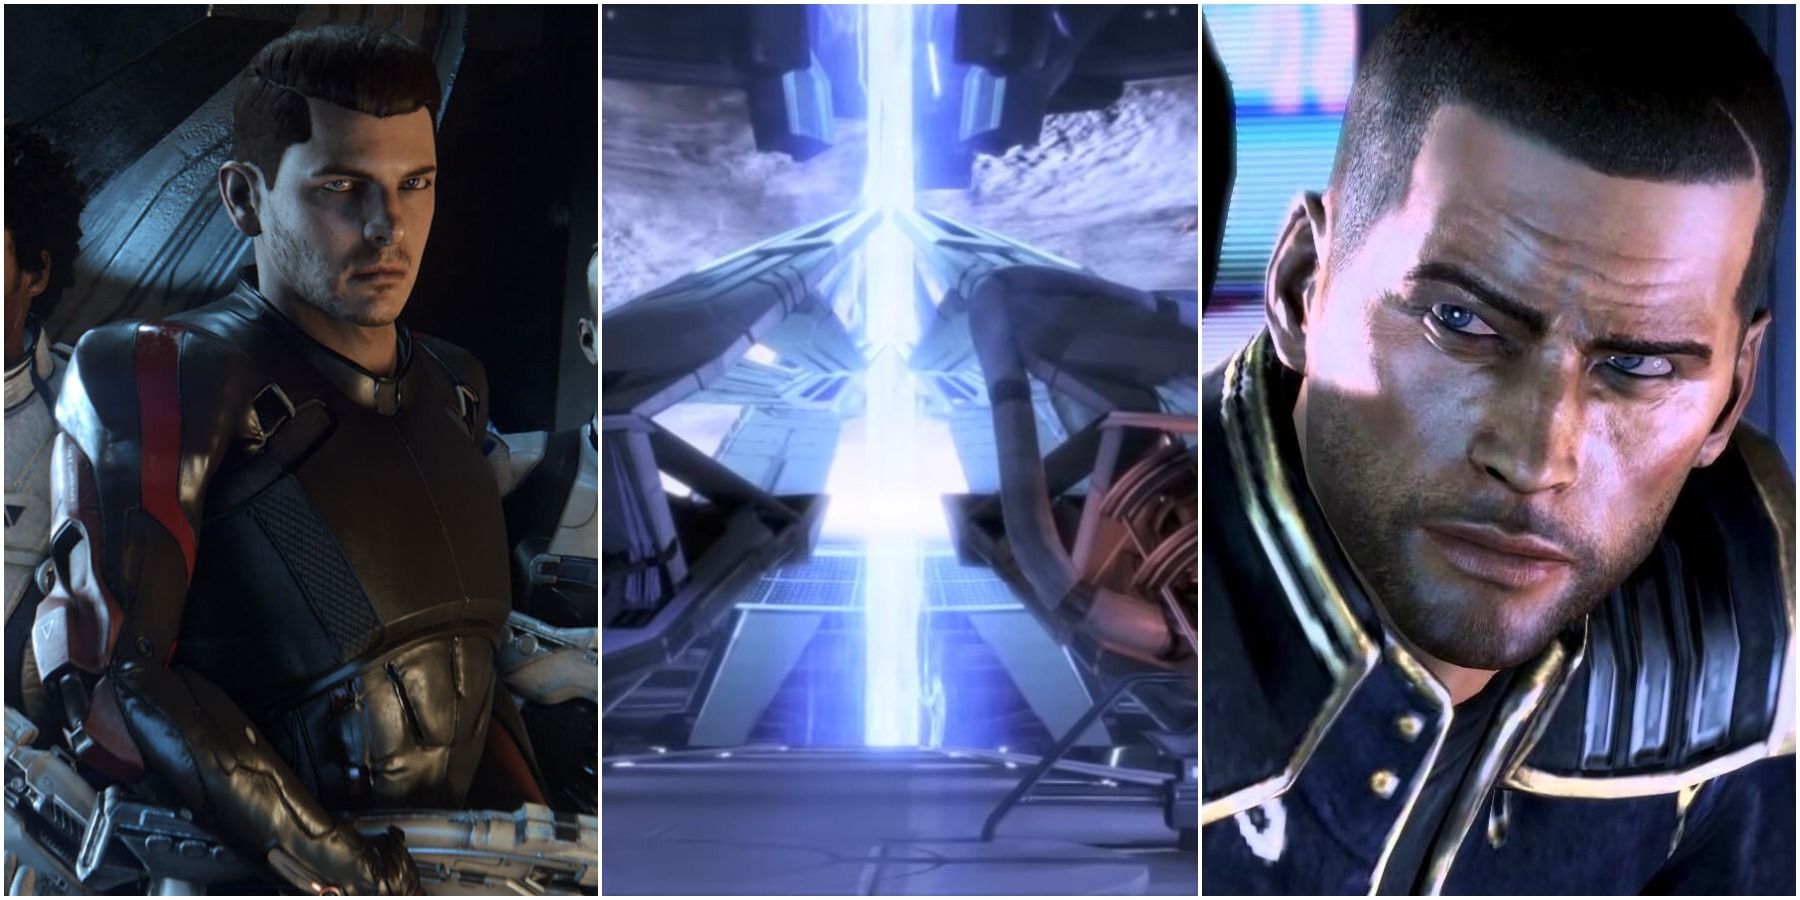 Shepard, The Crucible and Ryder from the Mass Effect series